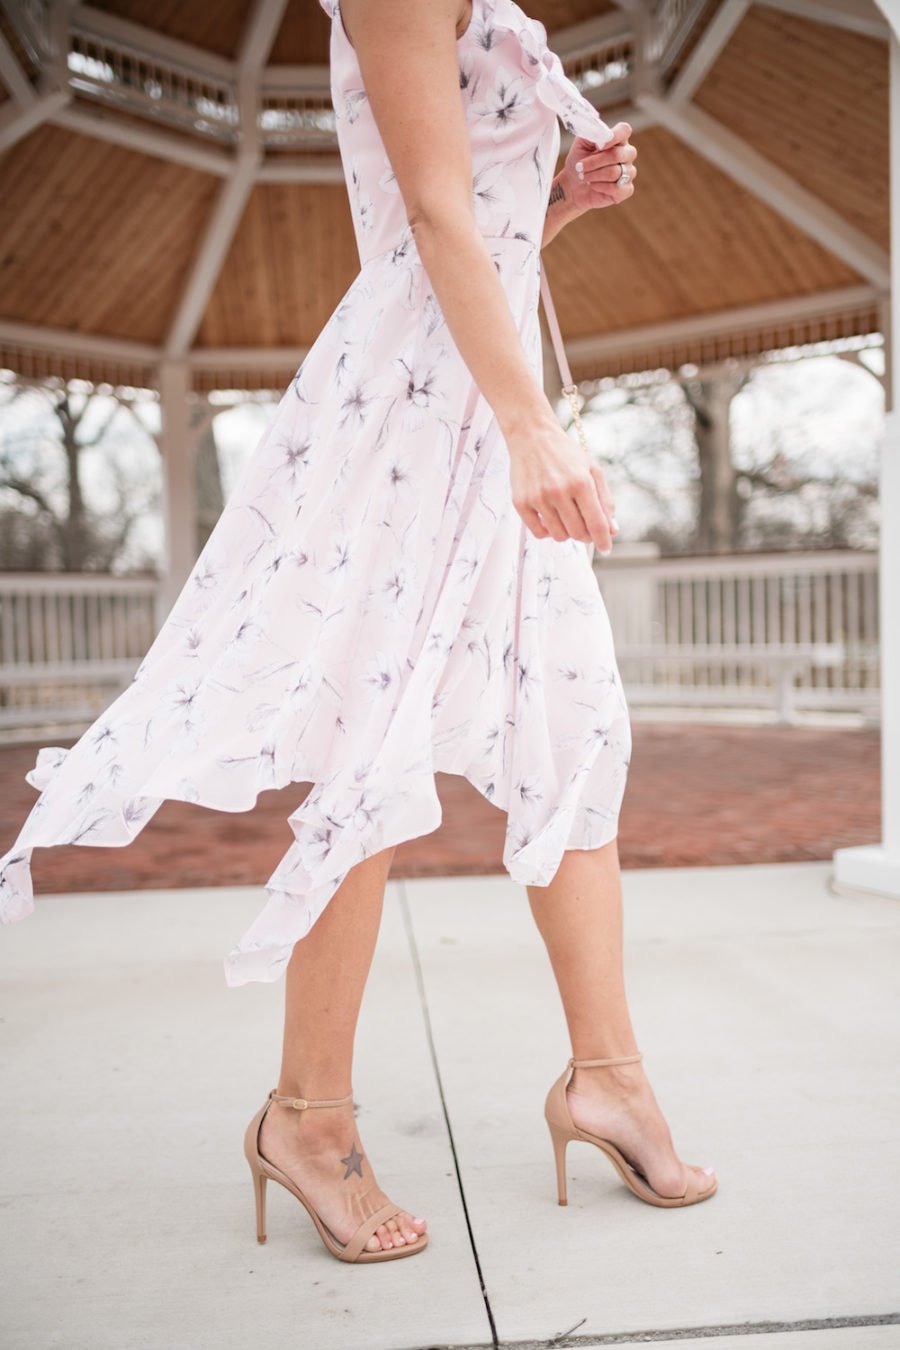 Purple floral party dress, nude strappy heels, cross body bag